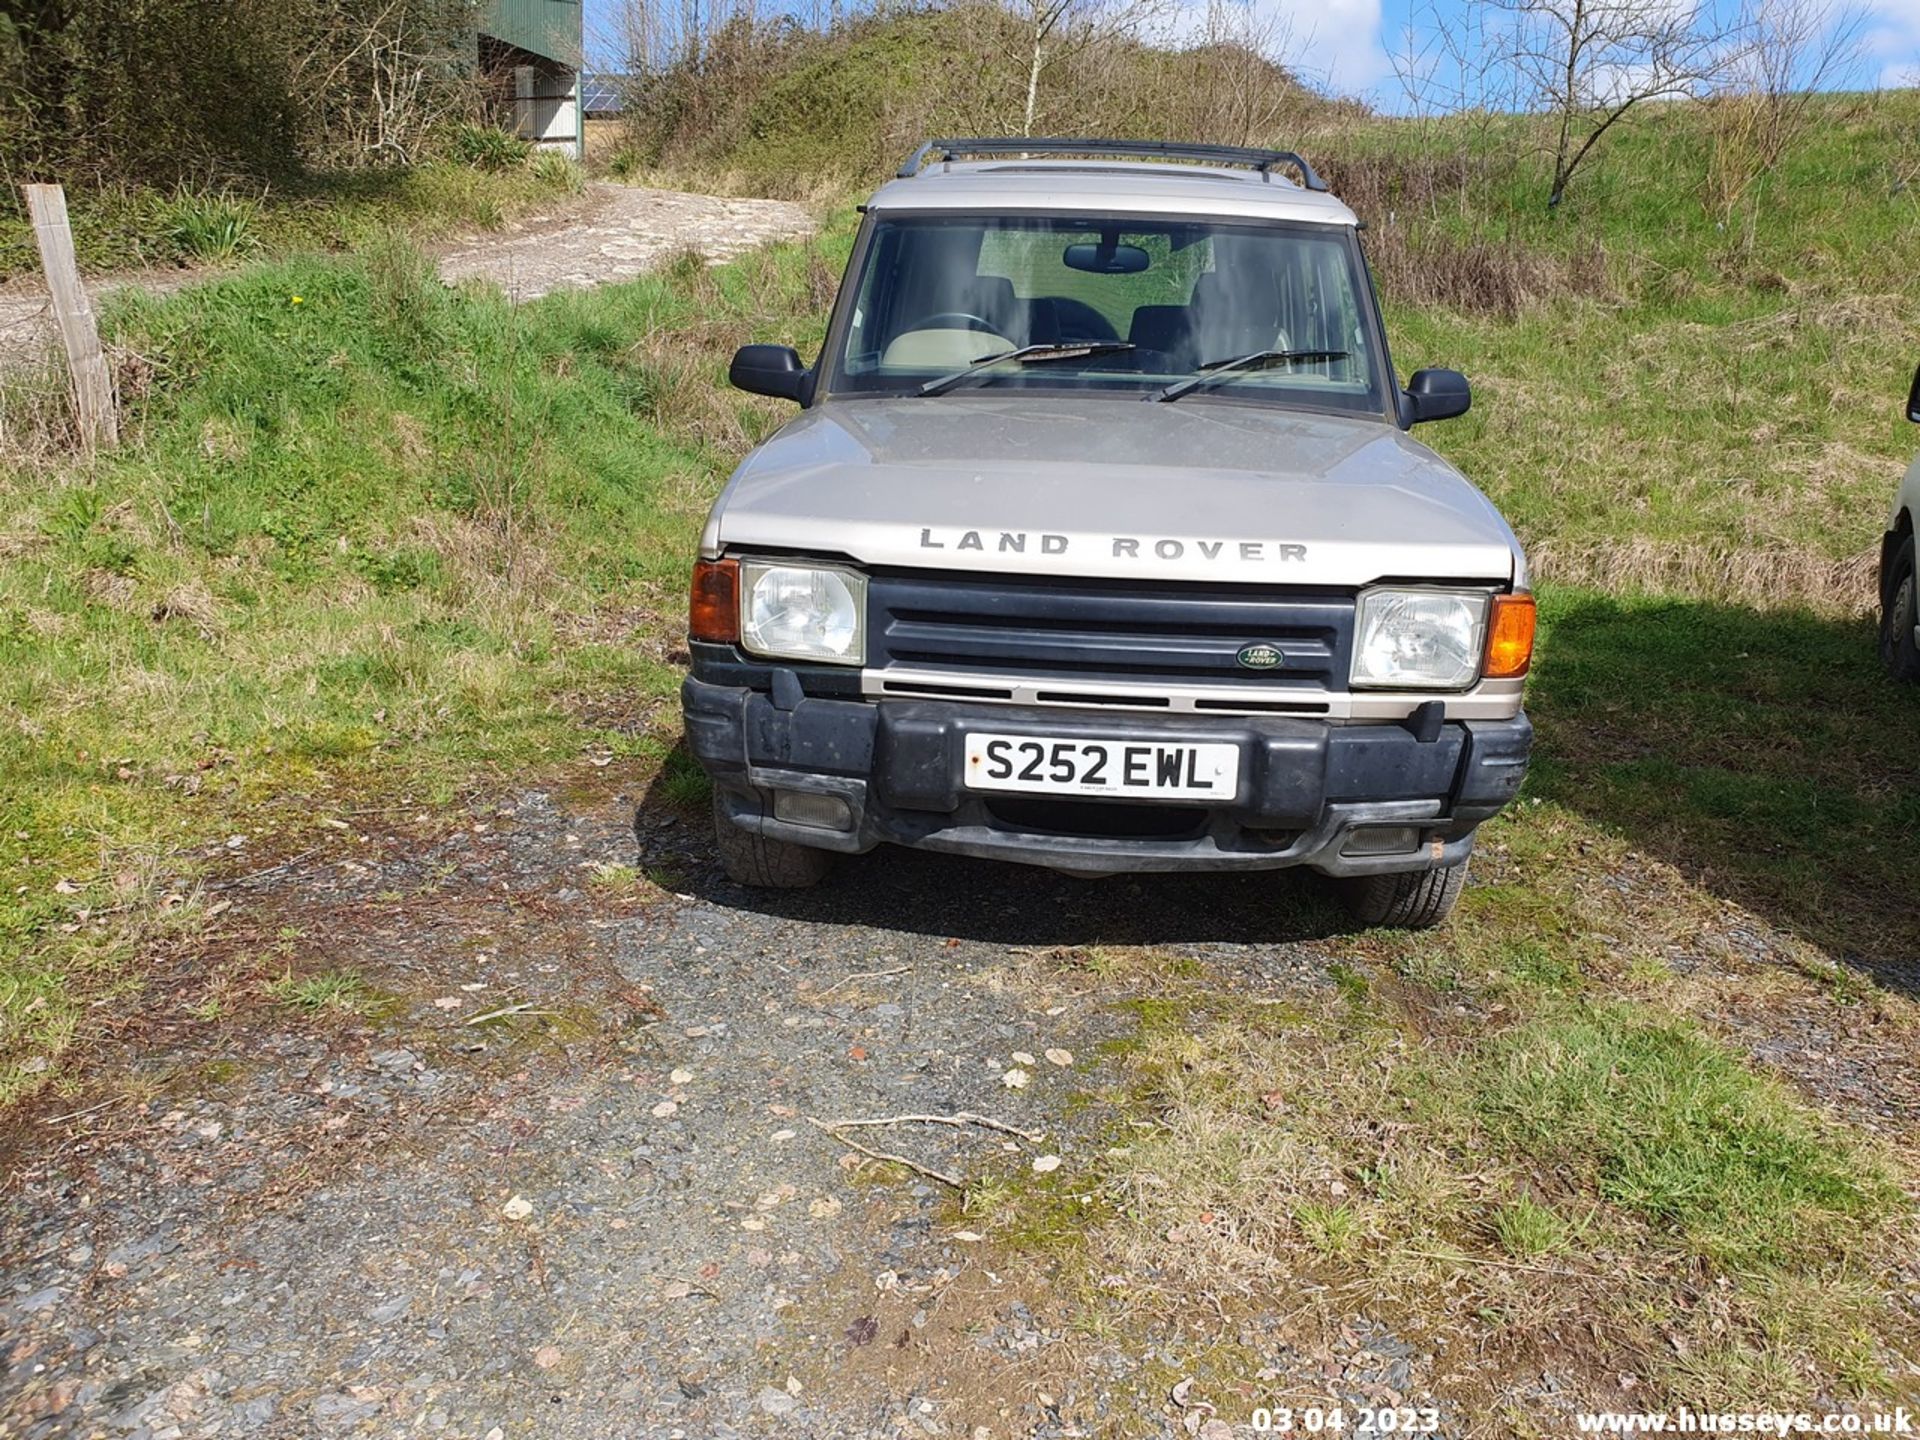 1998 LAND ROVER DISCOVERY ES TDI - 2495cc 5dr Estate (Gold) - Image 5 of 31